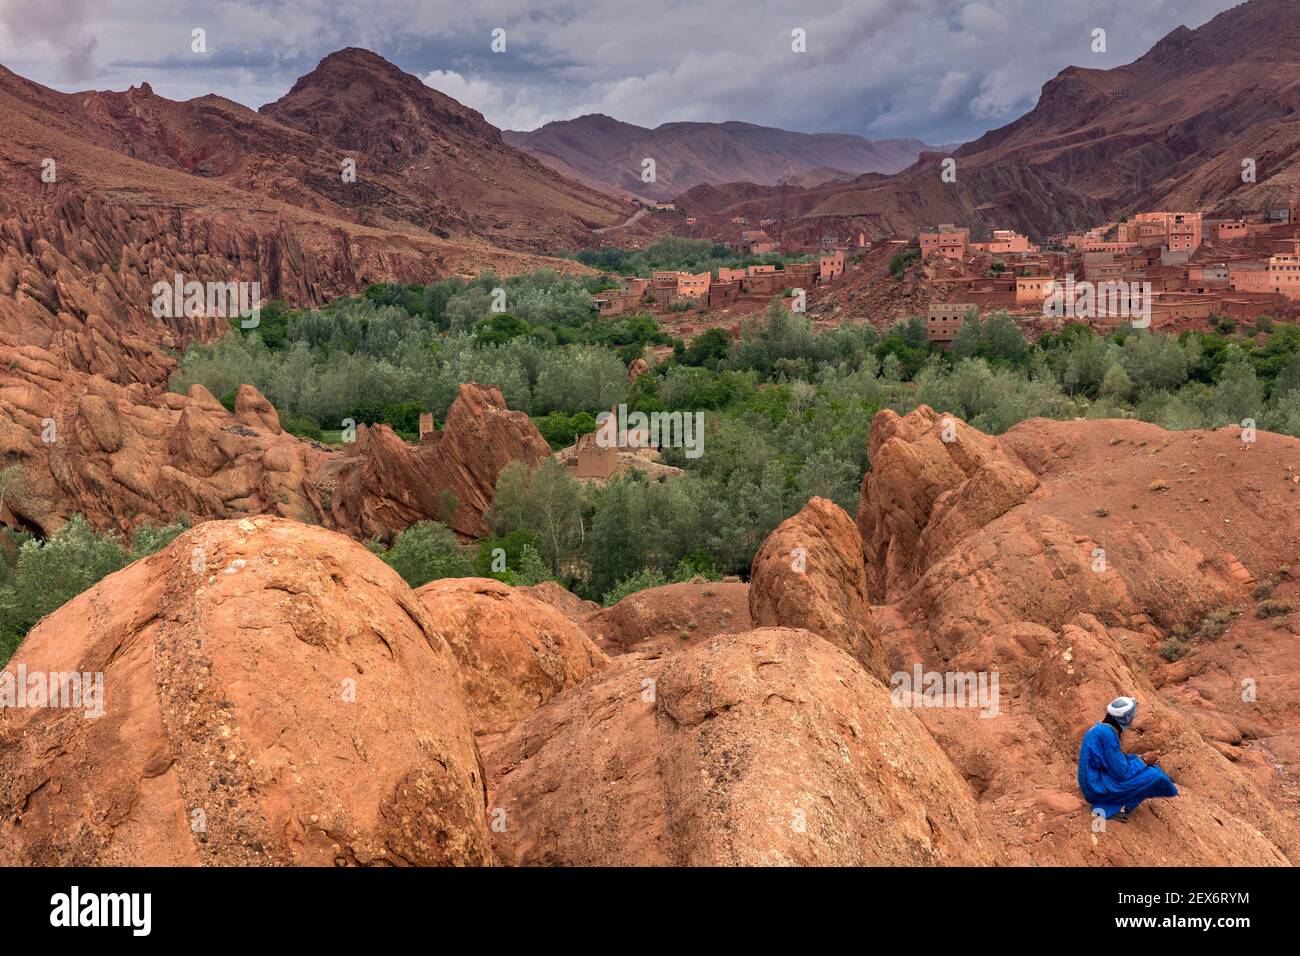 Morocco, Dades Valley near the "Monkey Paws" rock formations, with Berber male dressed in blue. A barren landscape with lush vegetation along a river. Stock Photo